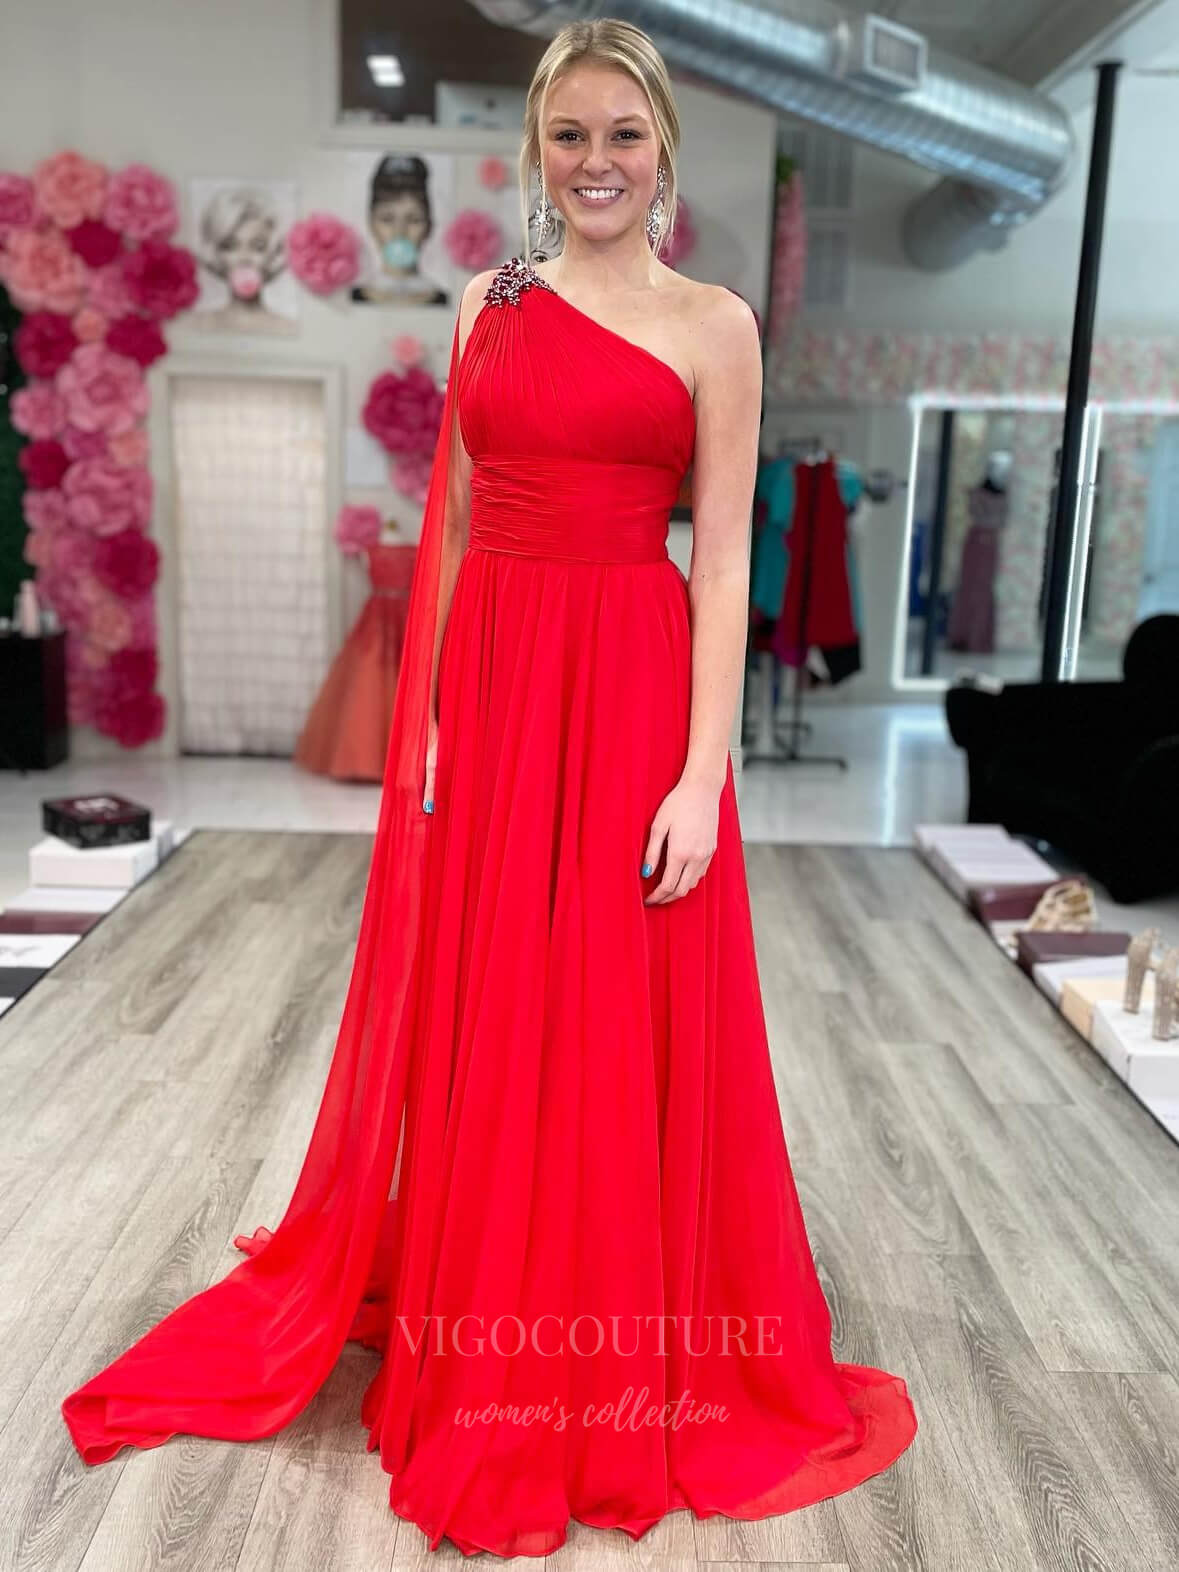 vigocouture-Red Pleated Chiffon One Shoulder Prom Dress 20971-Prom Dresses-vigocouture-Red-US2-